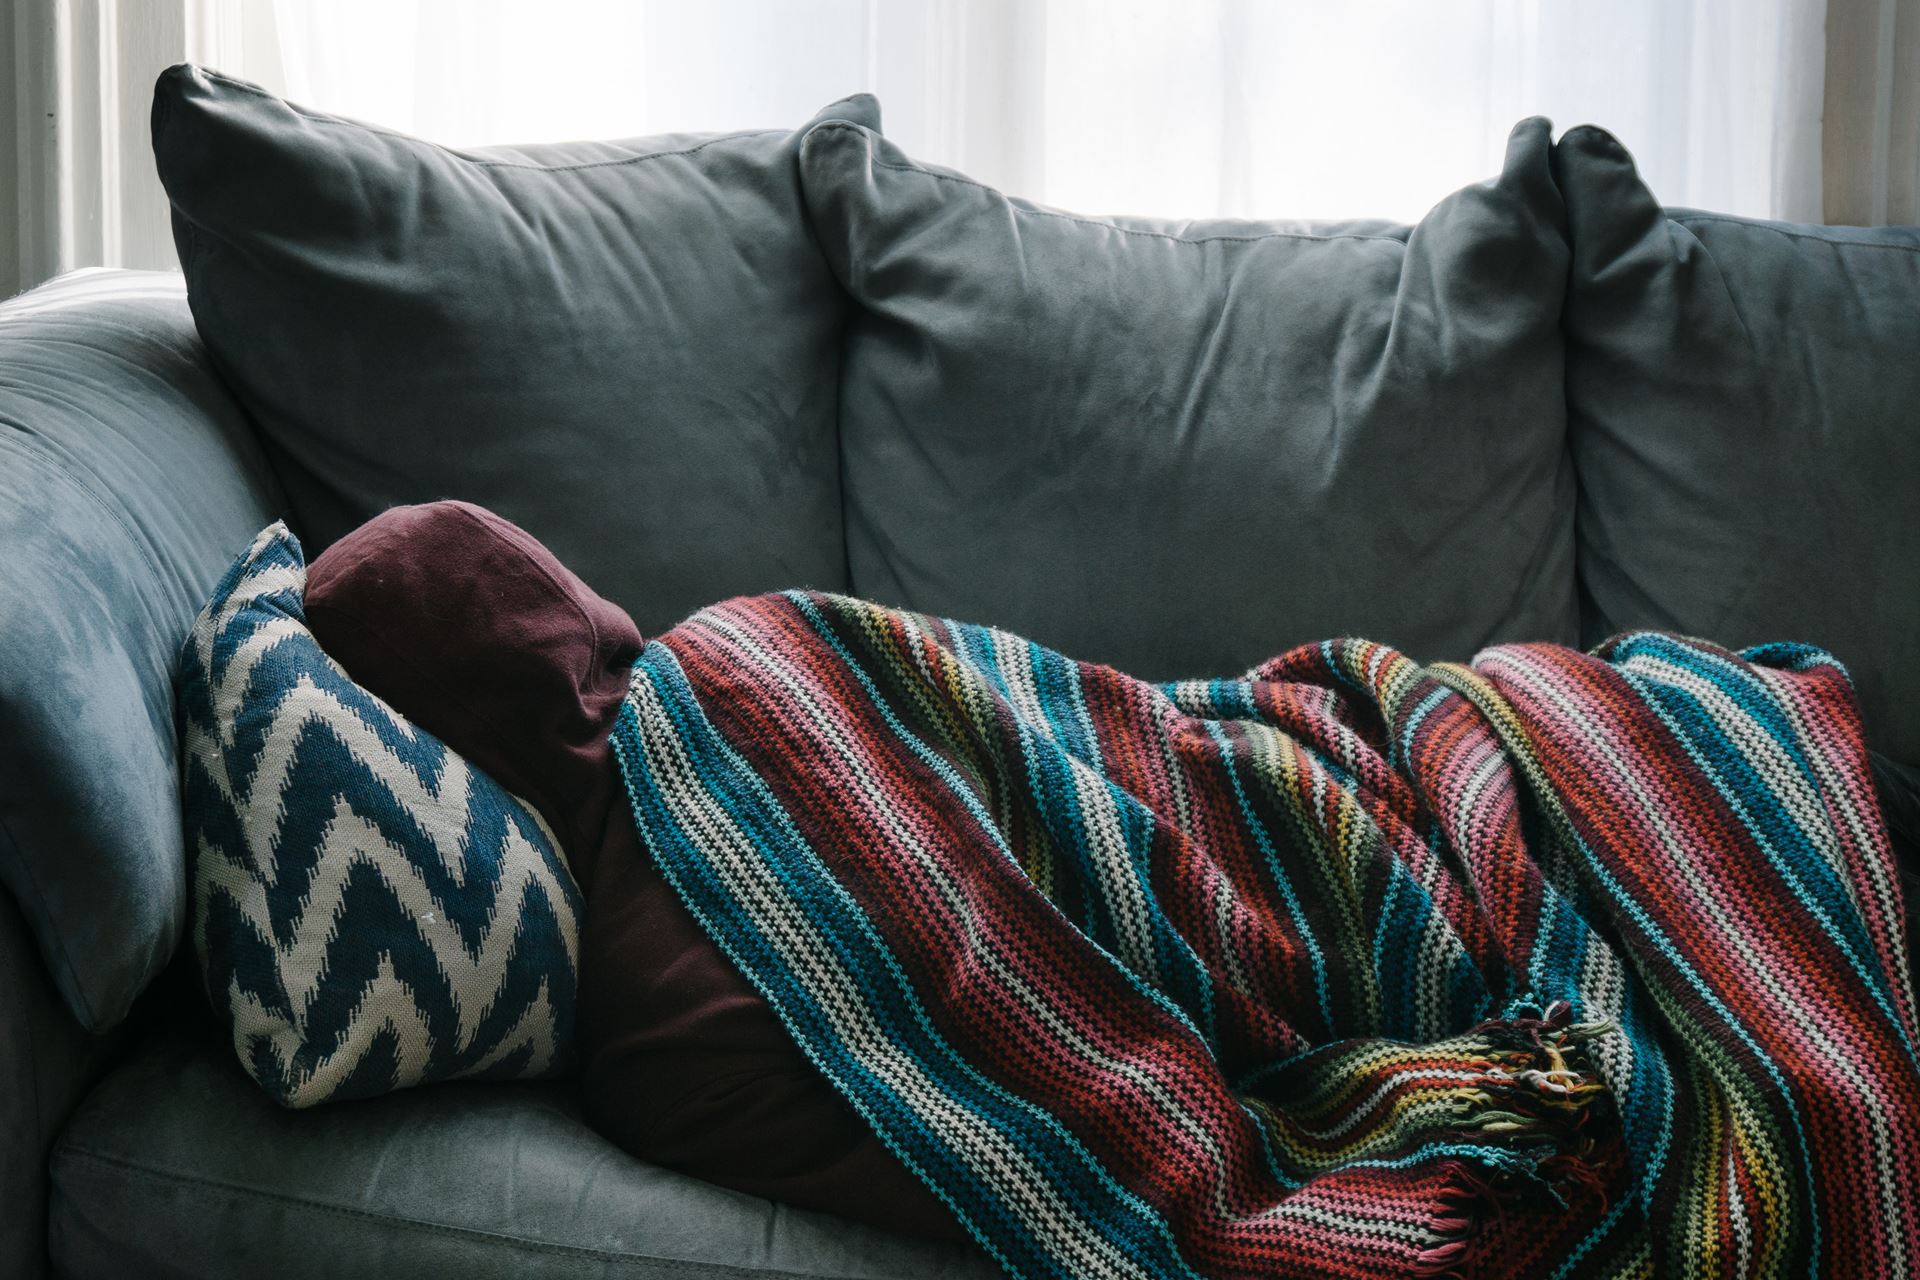 A person lying on the sofa covered in a blanket.